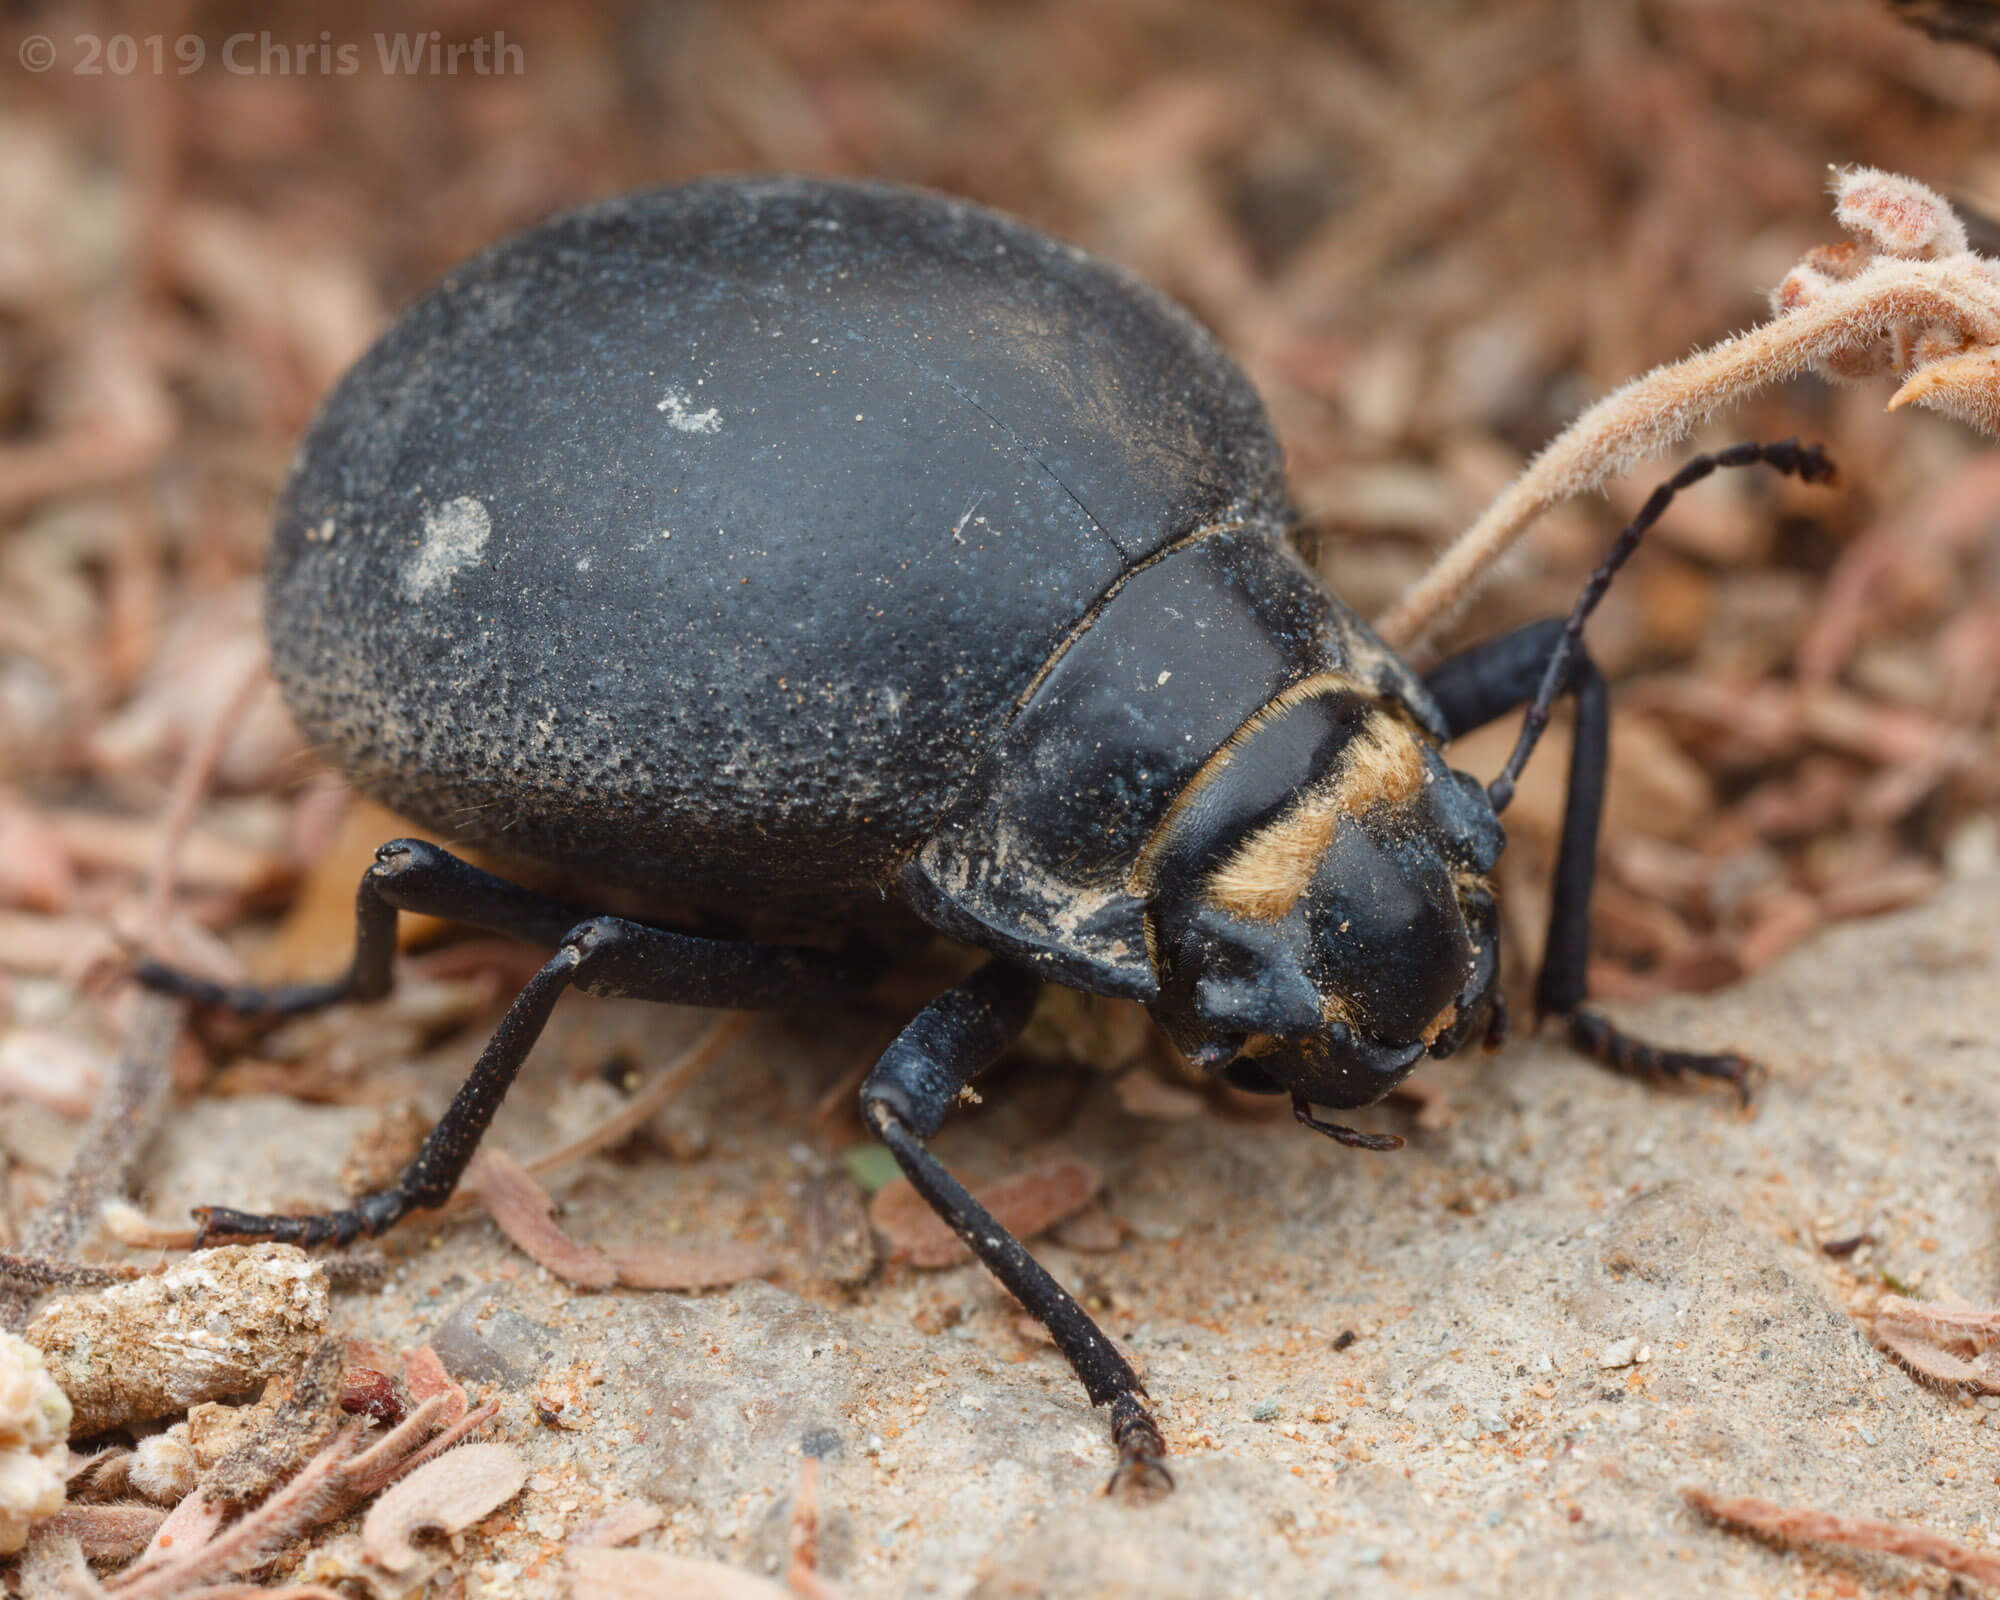 The Tenebrionidae beetle, found in southern Africa, has a super hard exterior that keeps it safe from predators. (Photo provided by Chris Wirth)